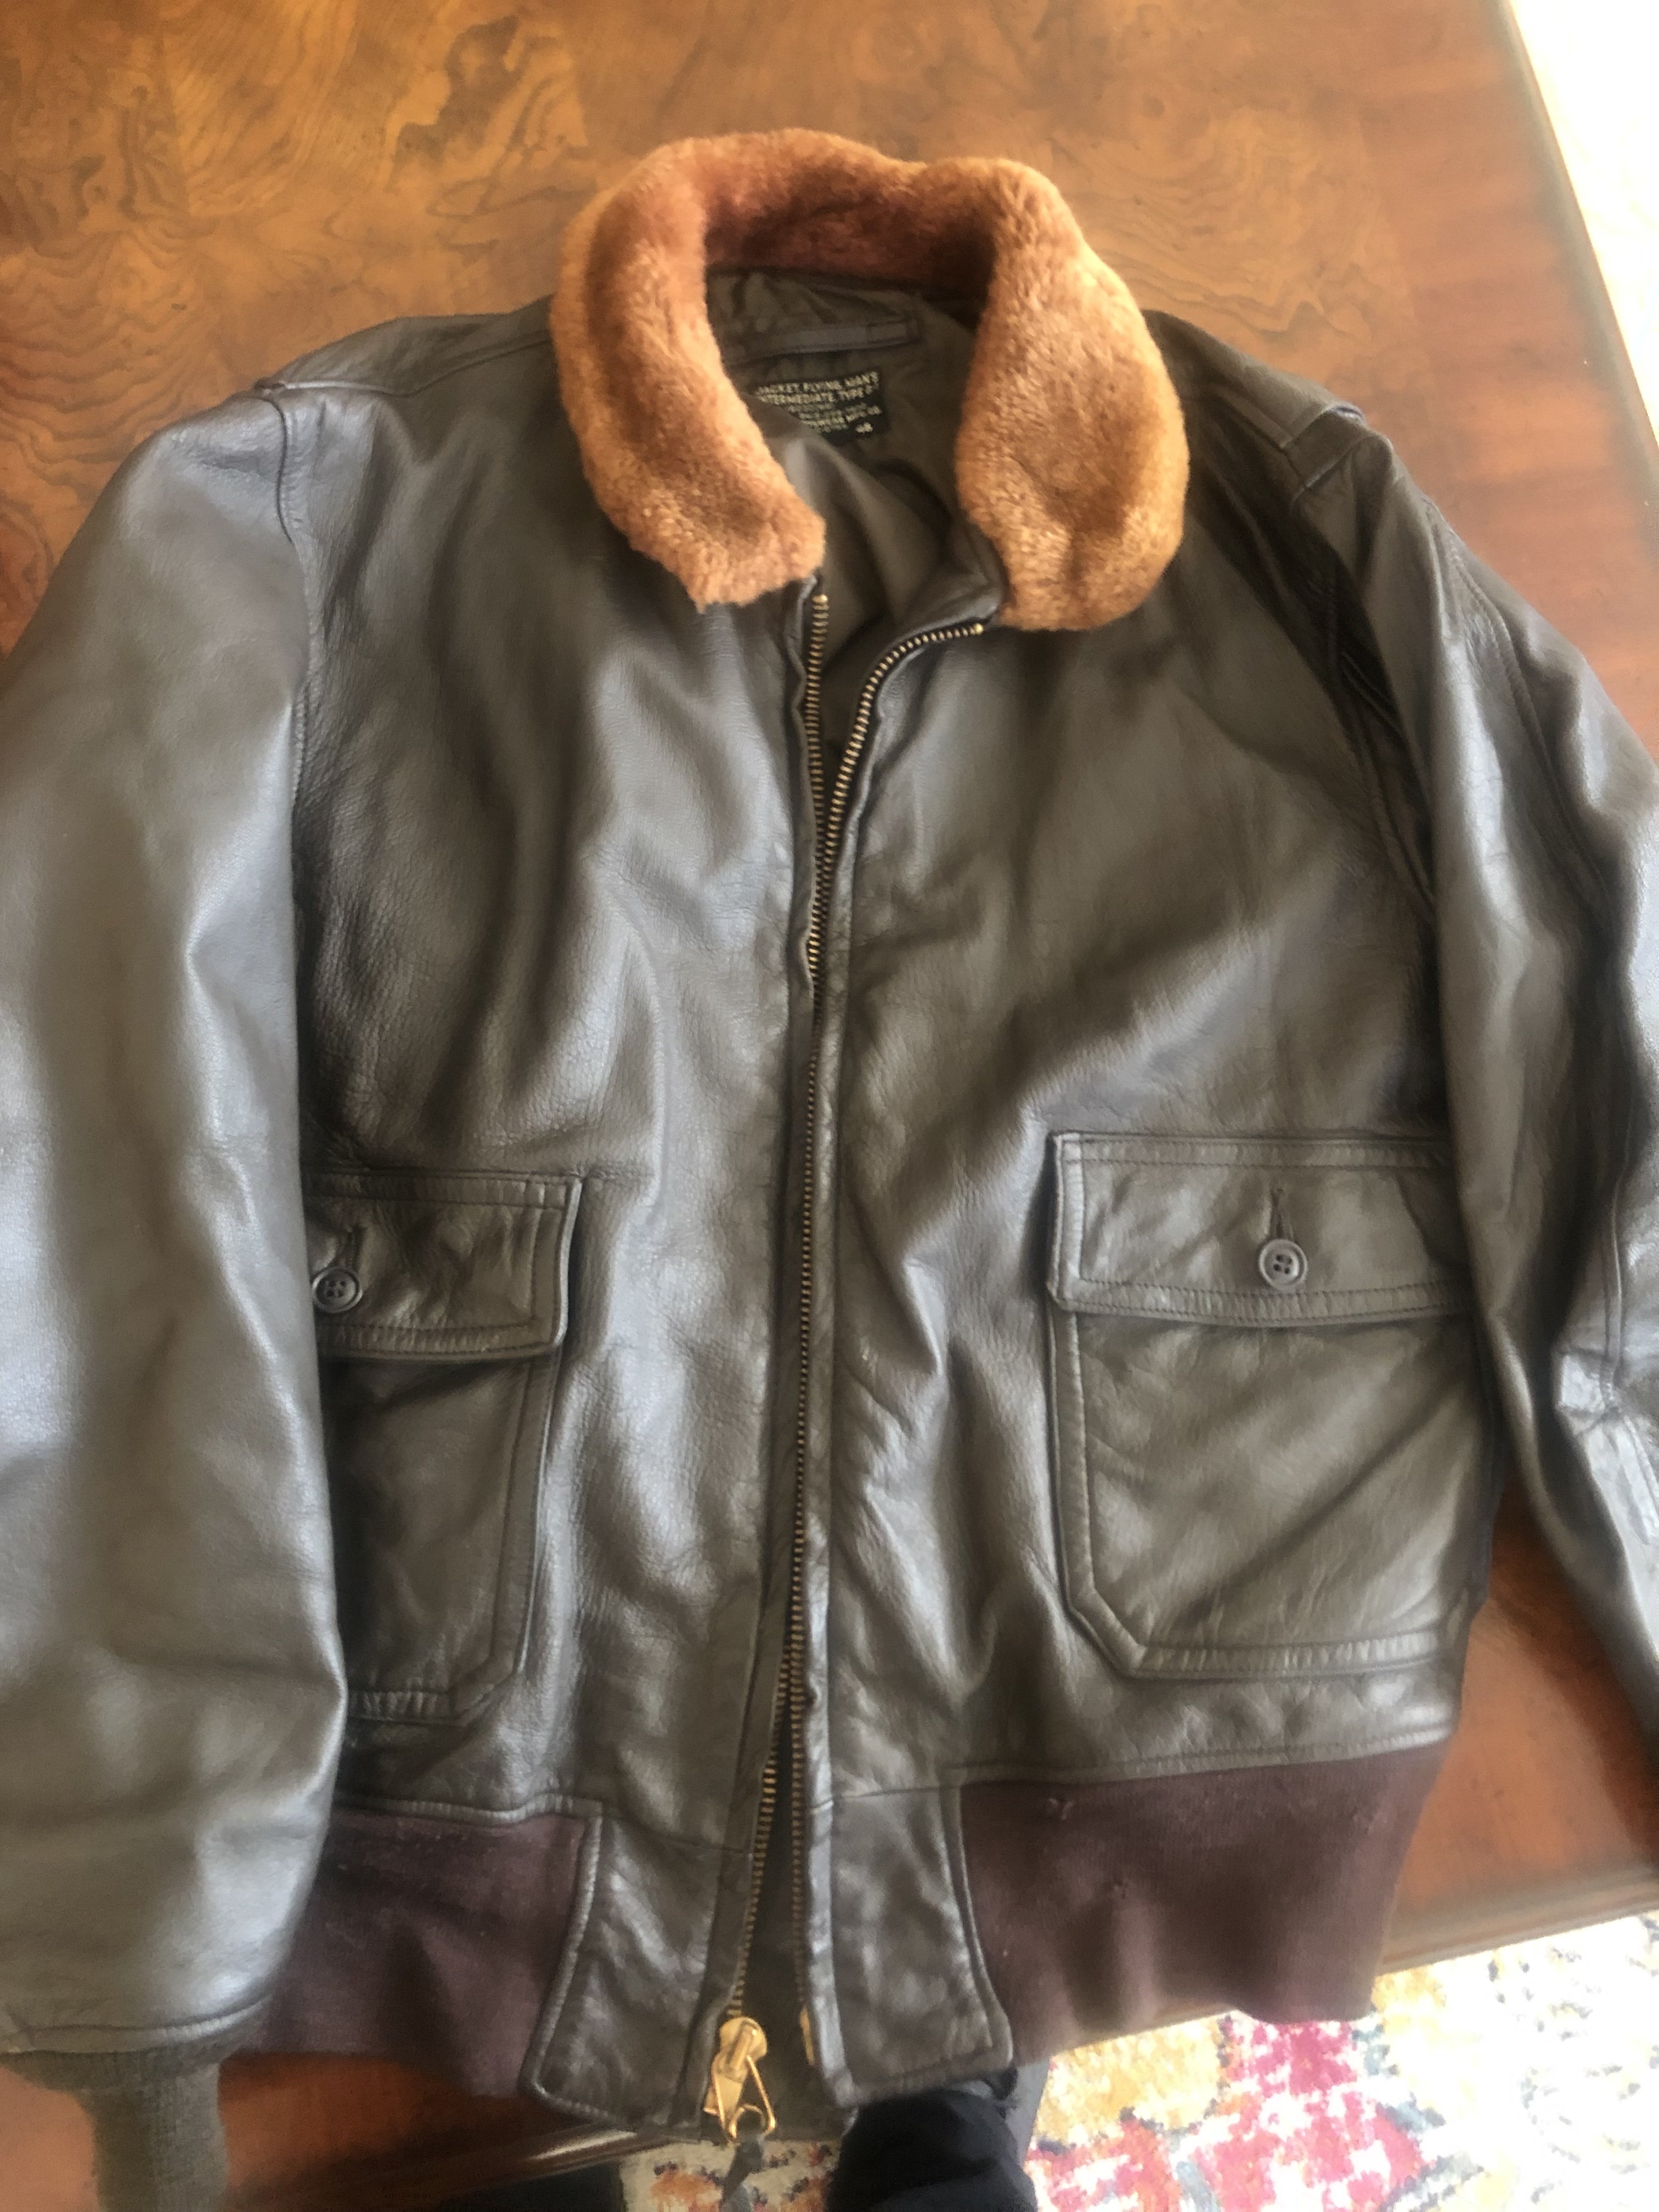 A New Find …. | Vintage Leather Jackets Forum